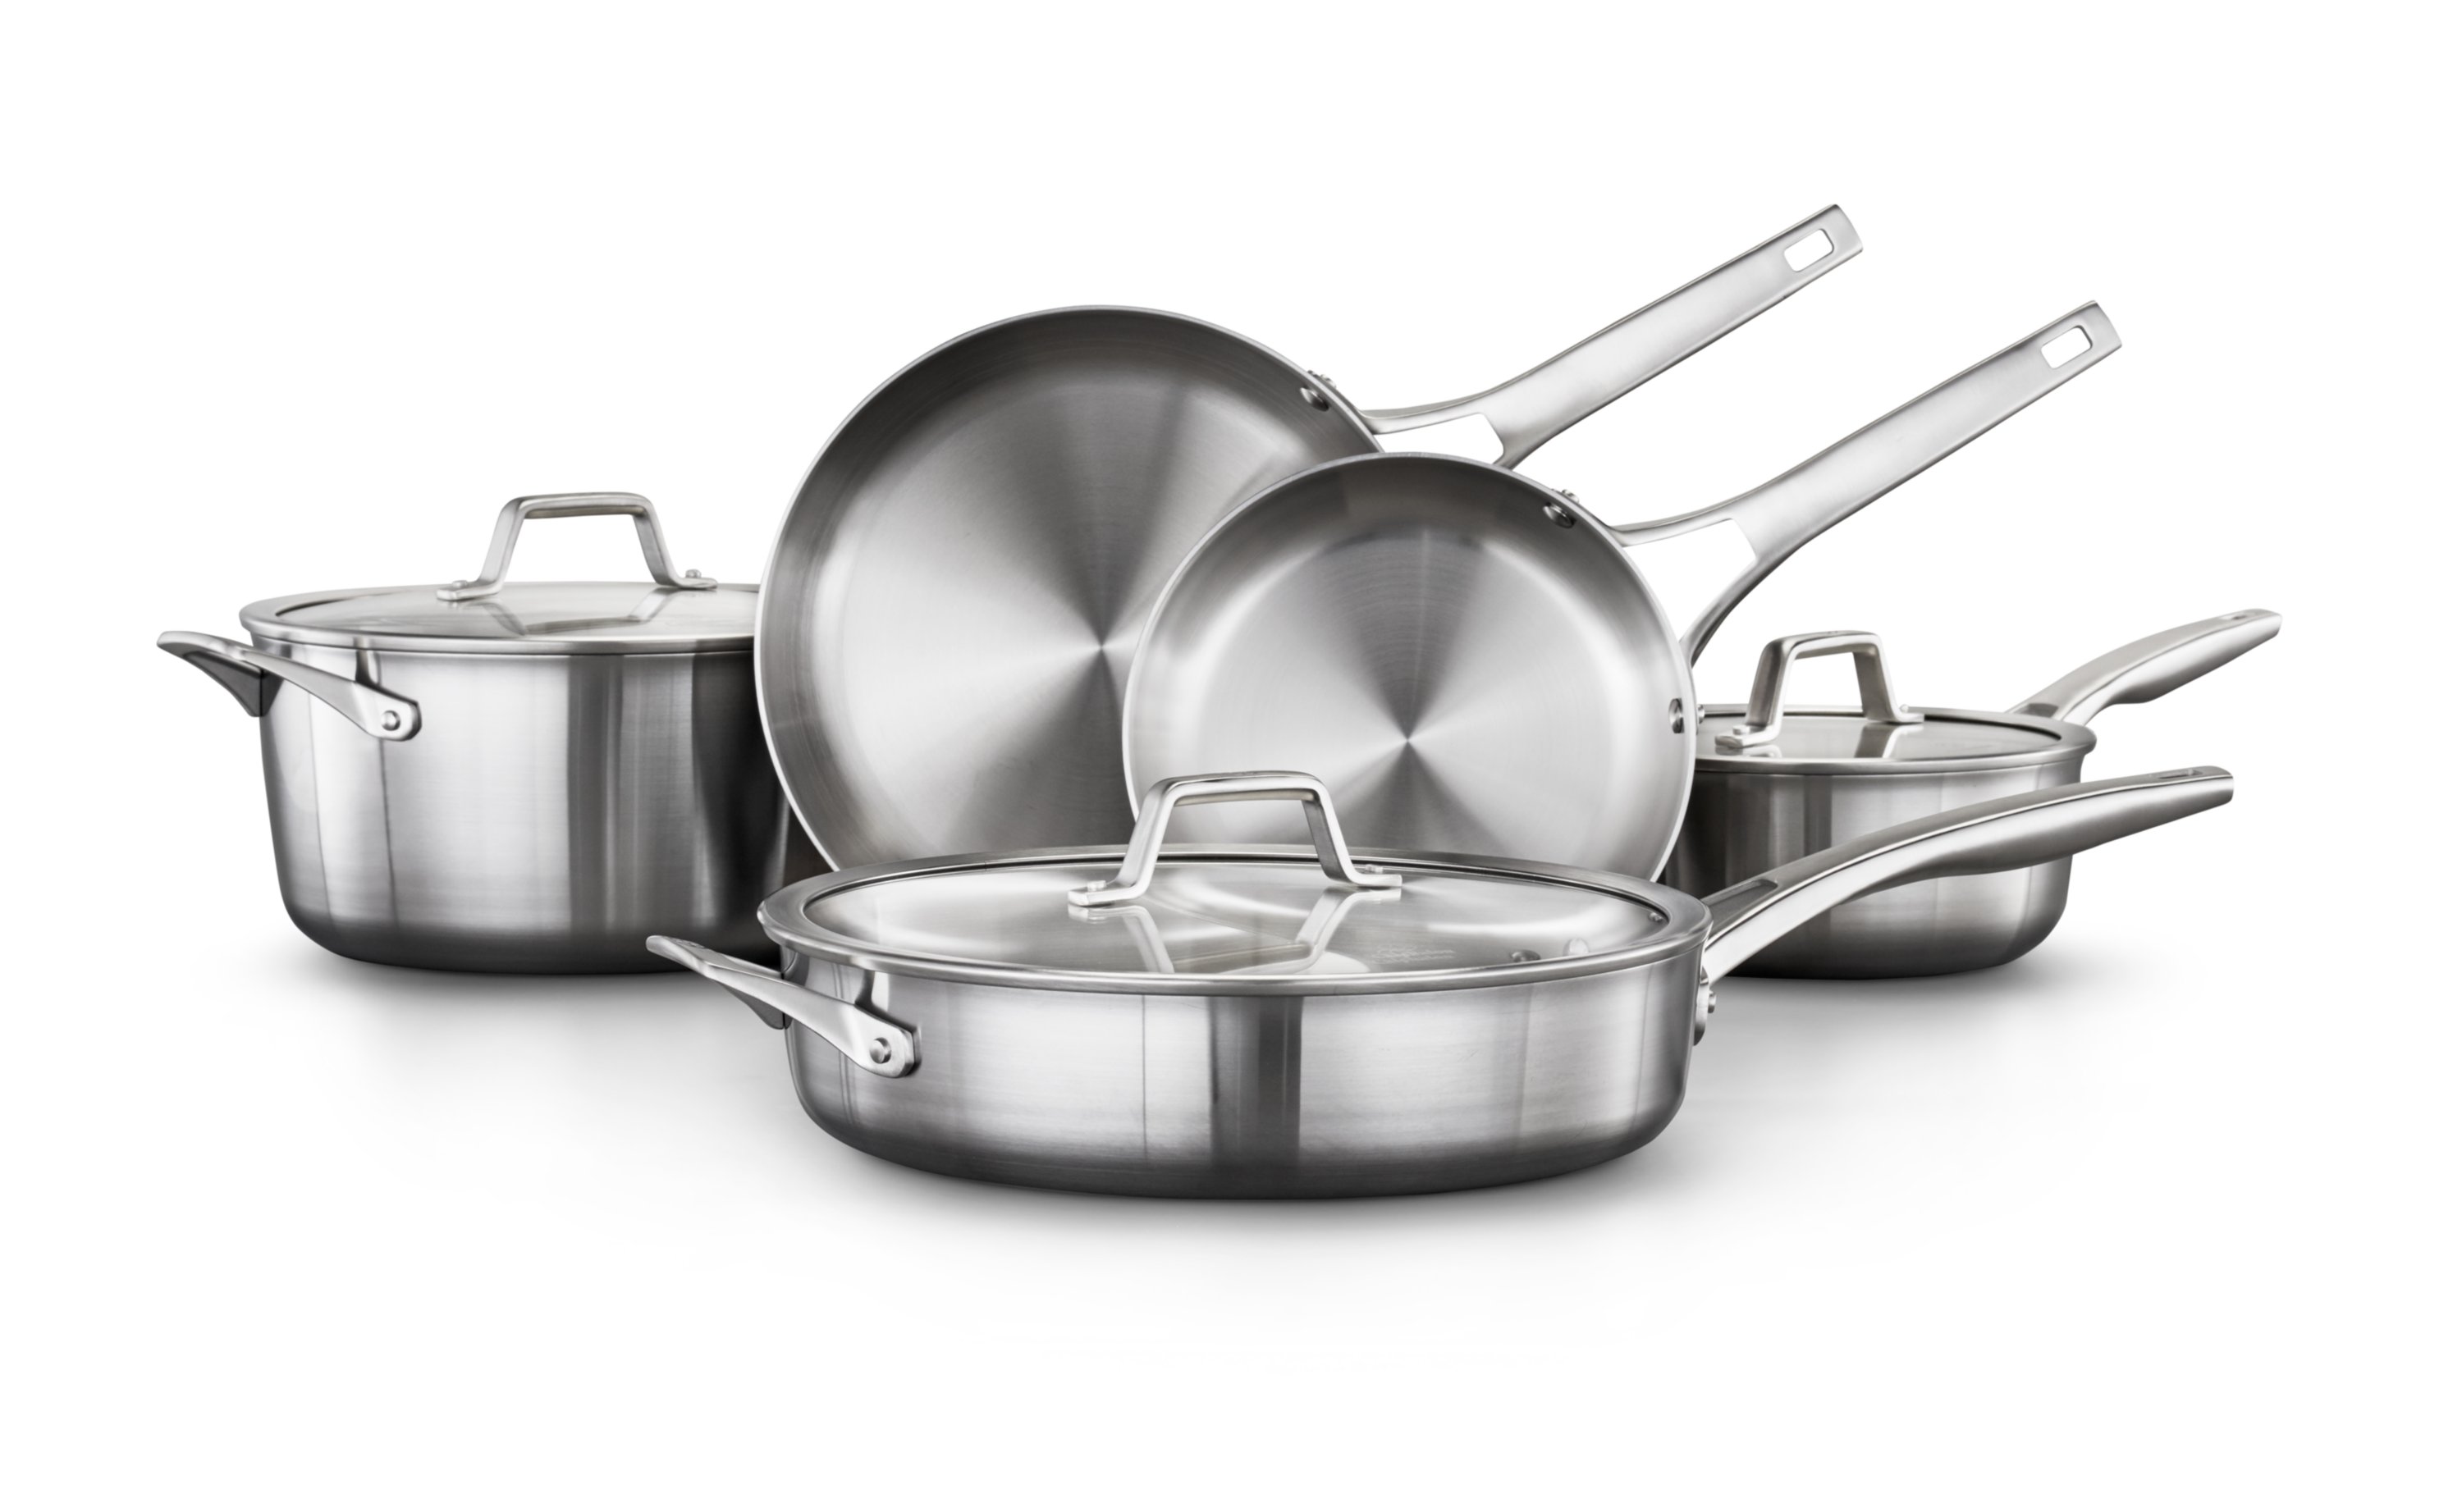 https://newellbrands.scene7.com/is/image//NewellRubbermaid/2029633-calphalon-premier-8pc-overhaul-set-ss-without-food-straight-on